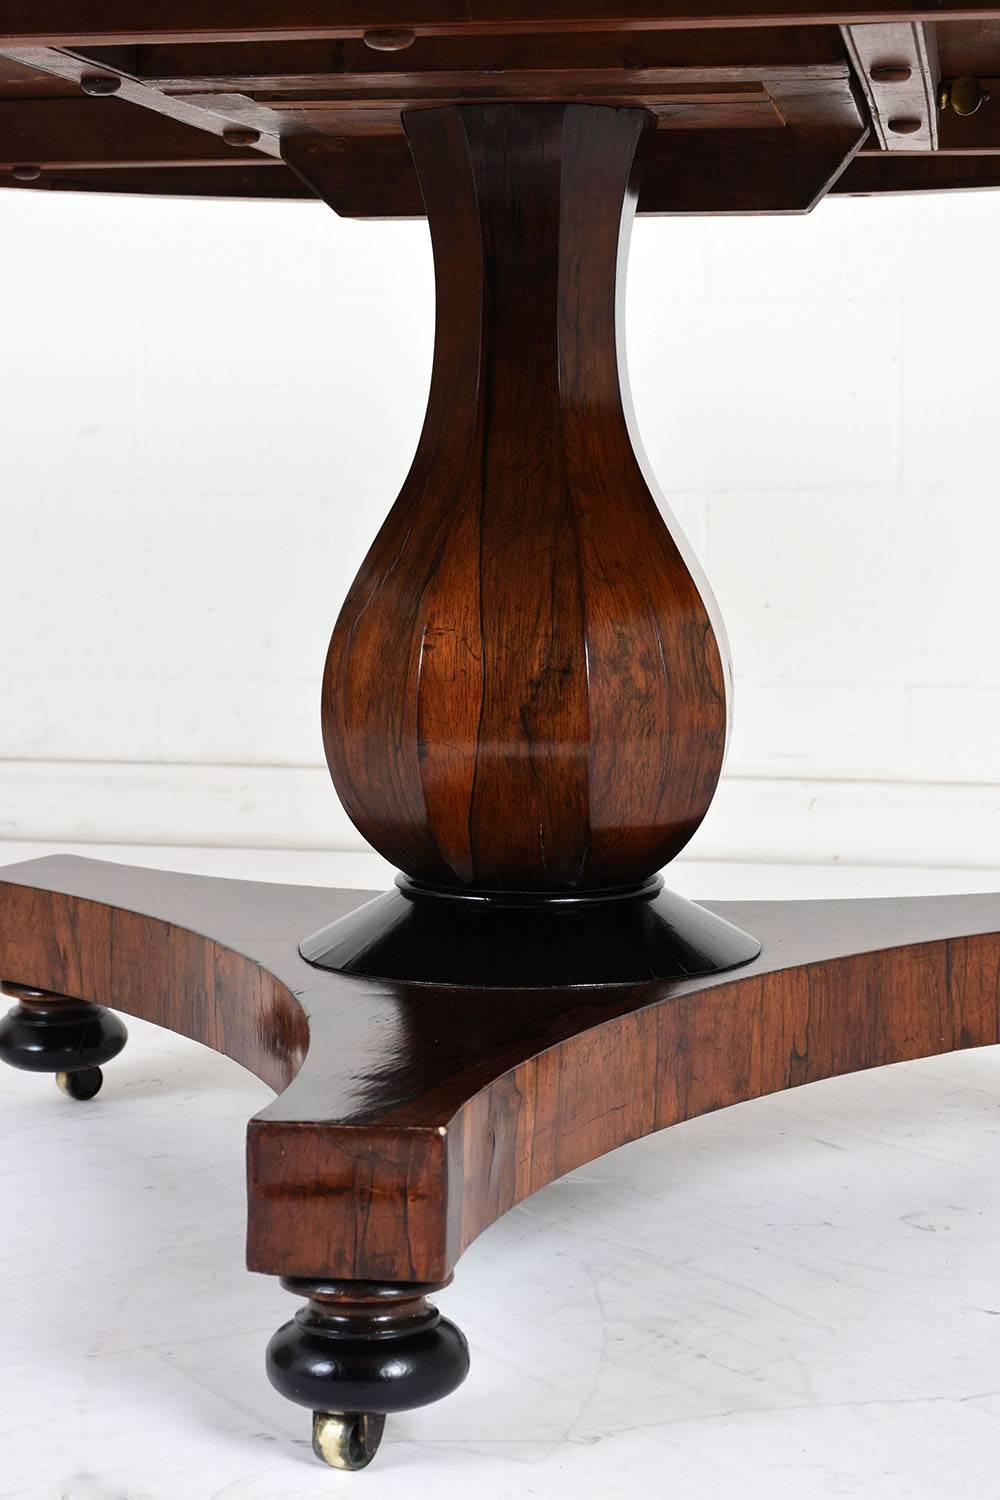 19th Century French Empire-Style Rosewood Center Tilt-Top Table